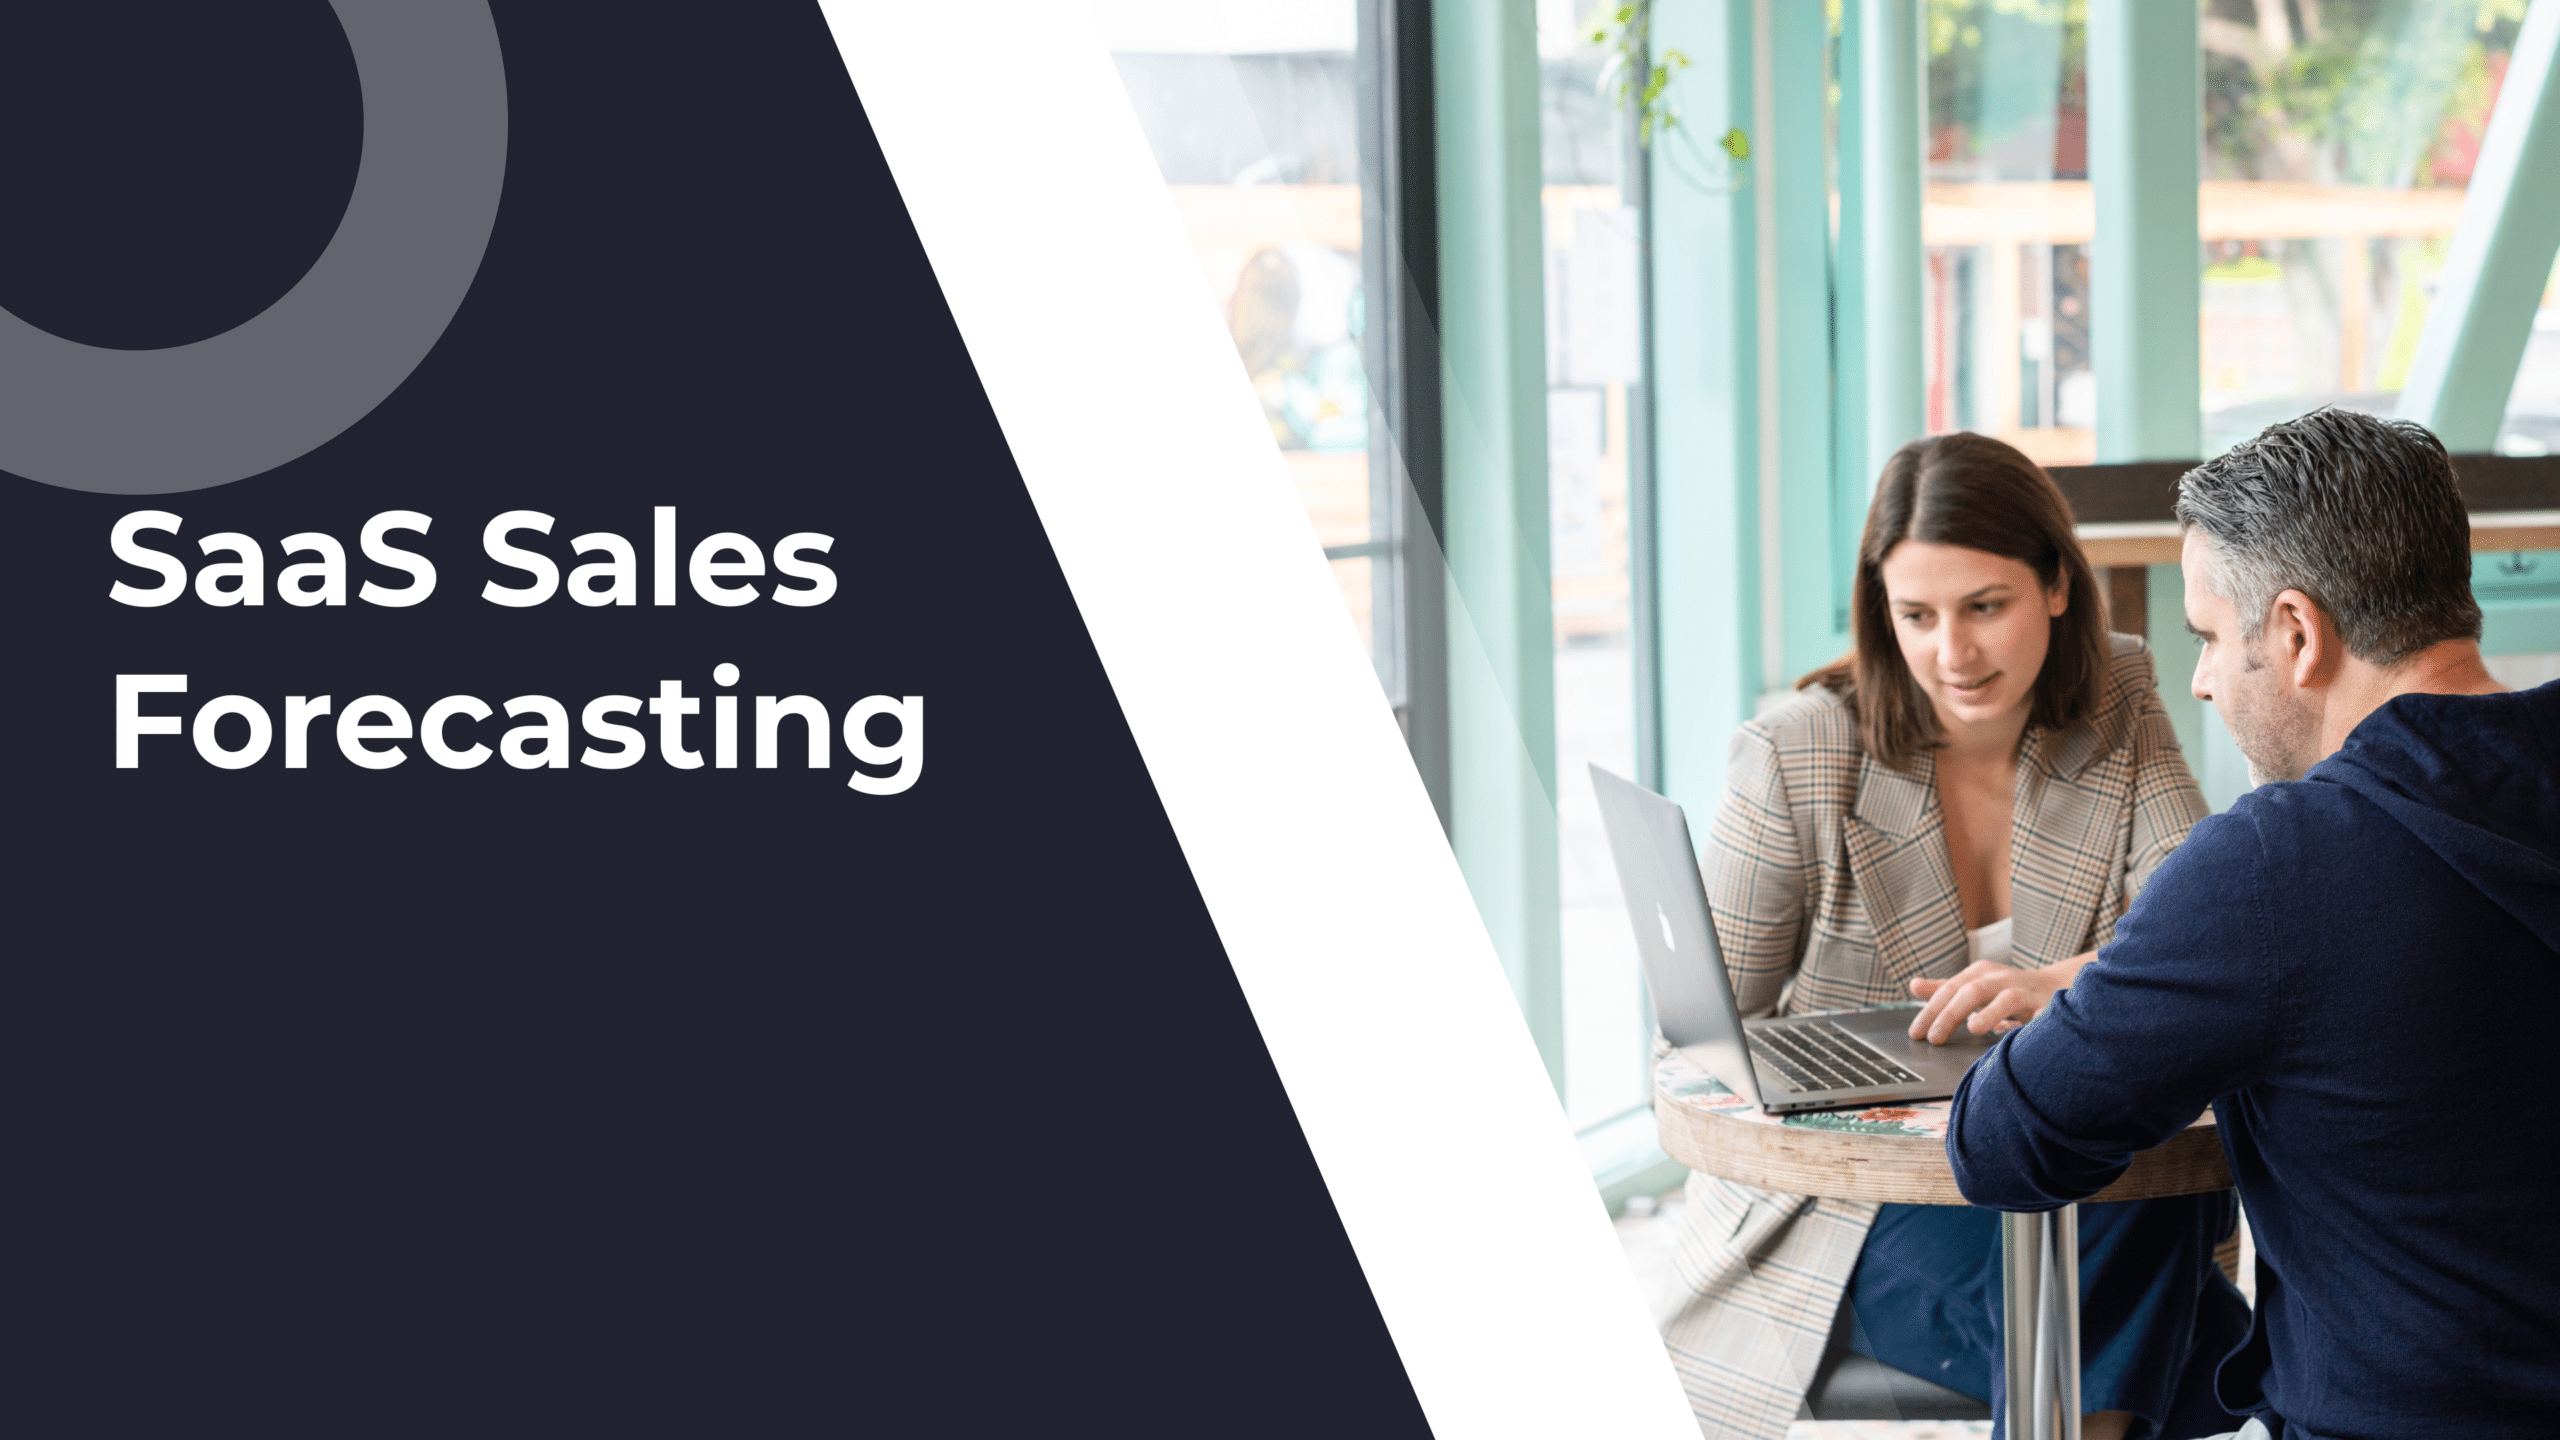 All You Need to Know About SaaS Sales Forecasting